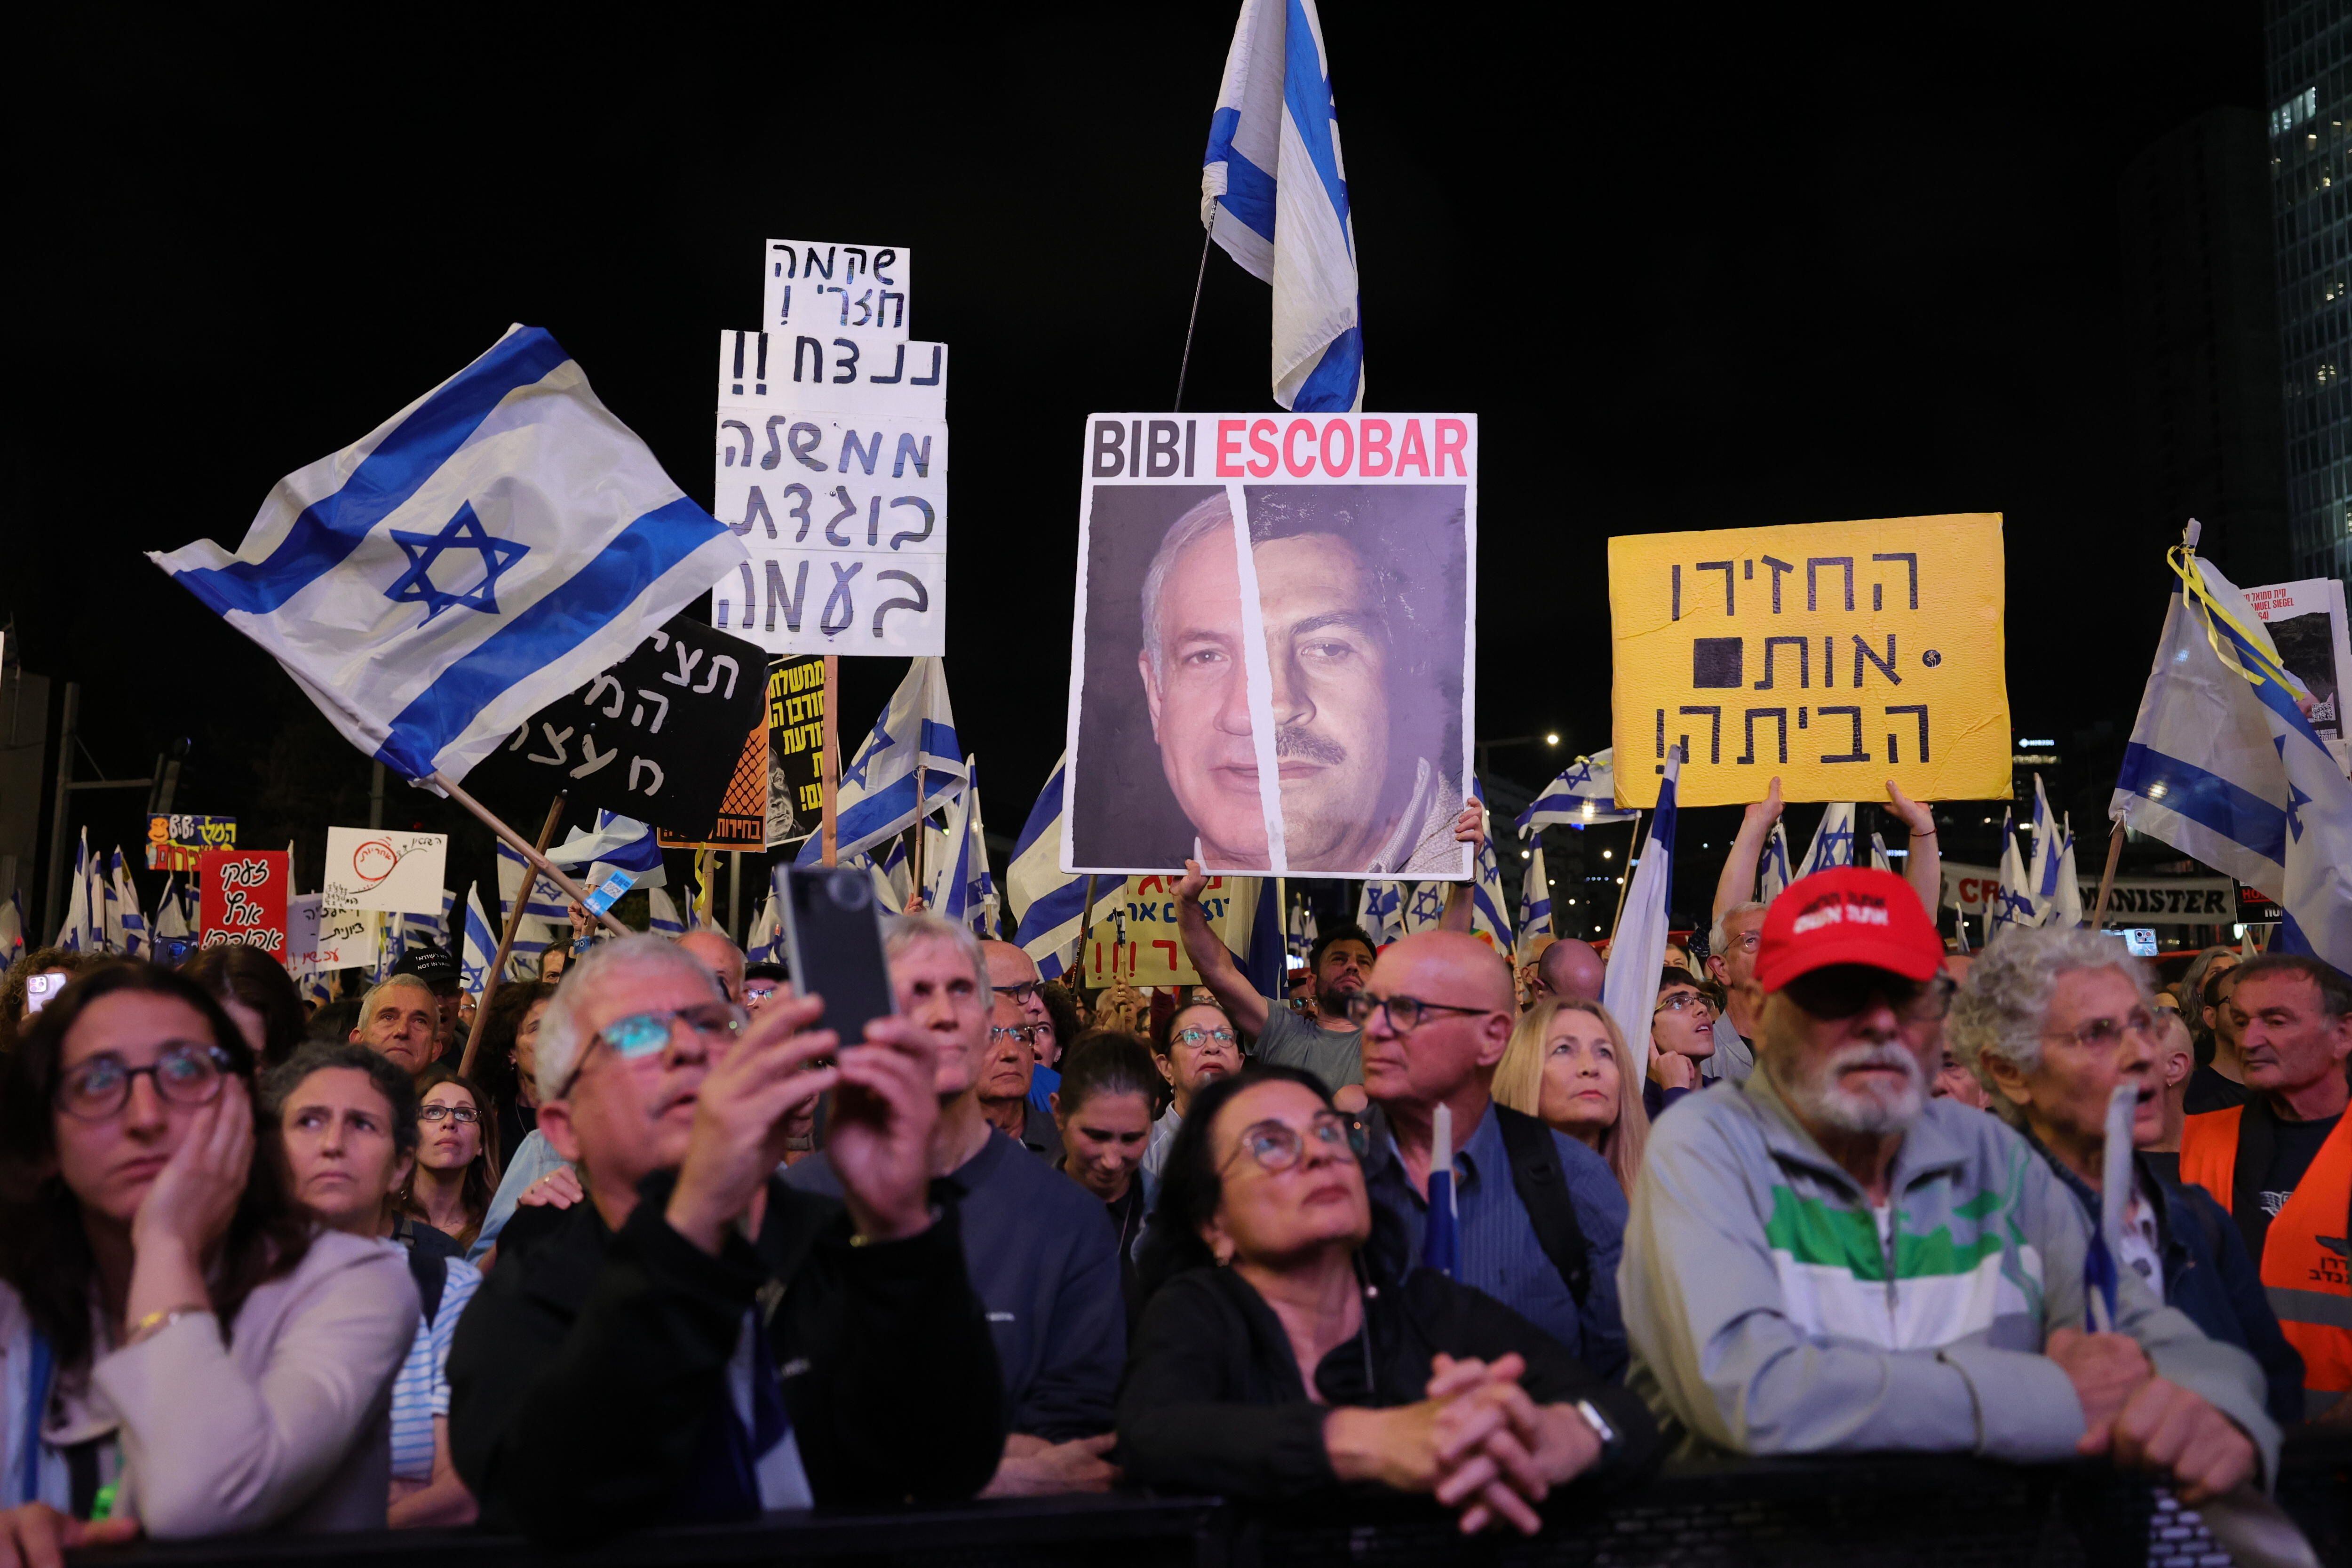 Hundreds of protesters in Tel Aviv demanding an agreement between the Israeli government and Hamas to release the hostages still being held in Gaza six months after the October 7 attack.